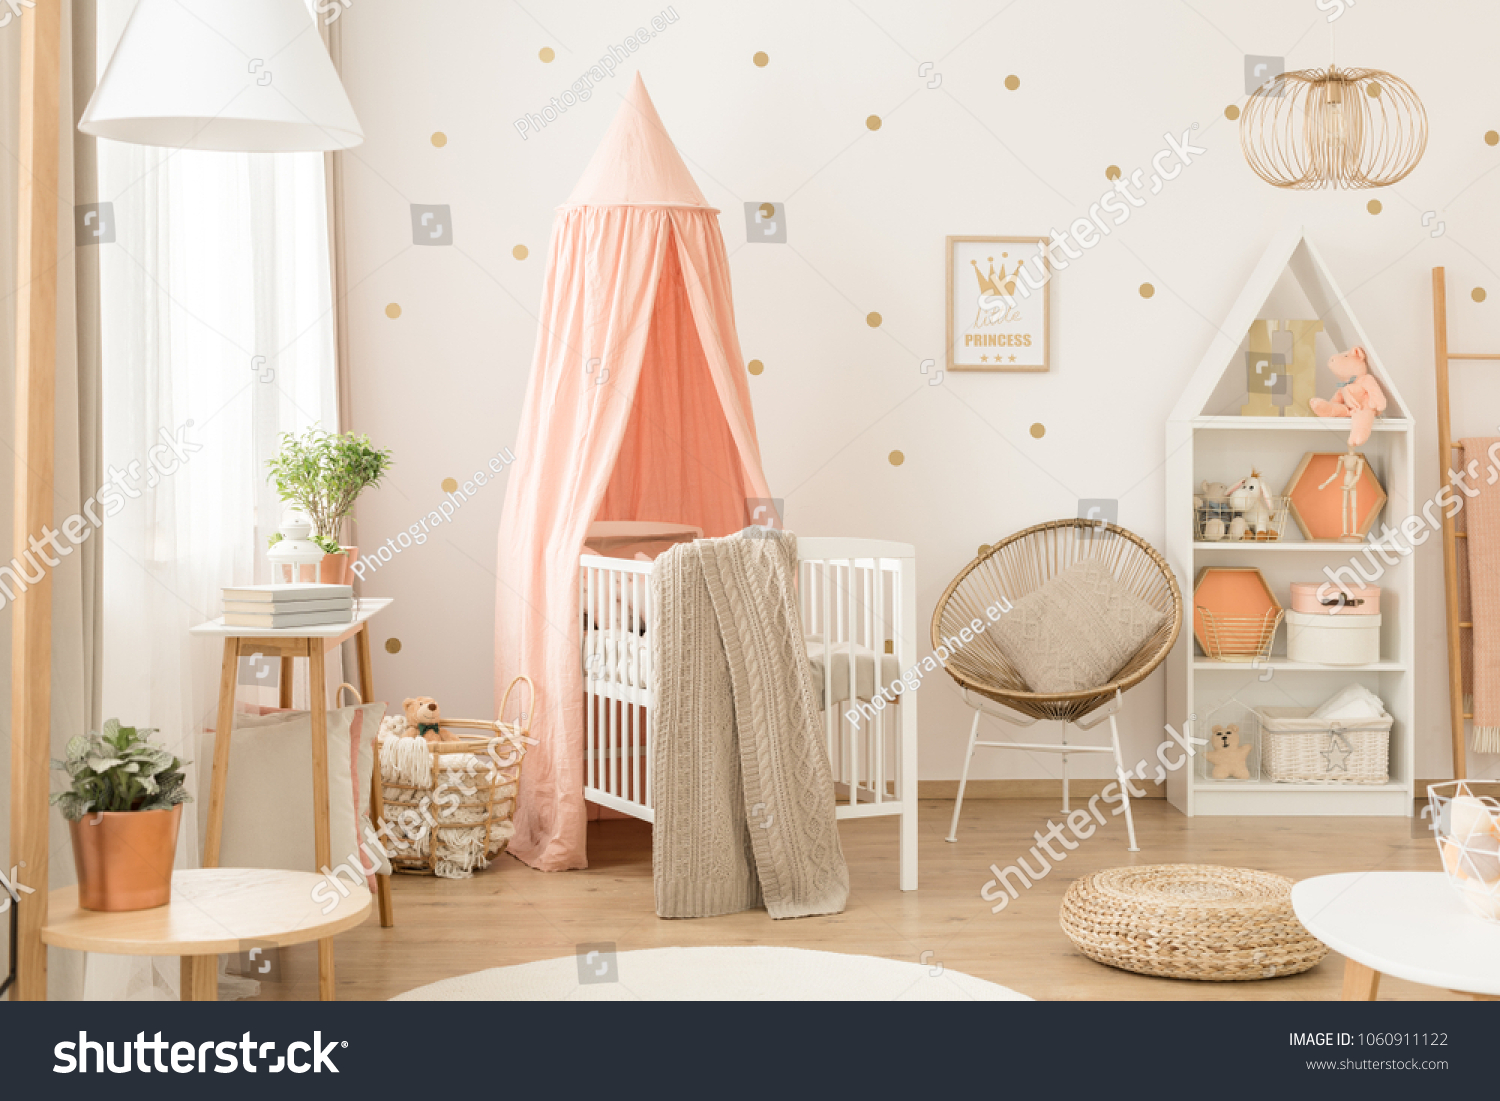 White bookcase with plush toys and decorations in a cute, cozy, white and peach pink scandinavian nursery interior #1060911122